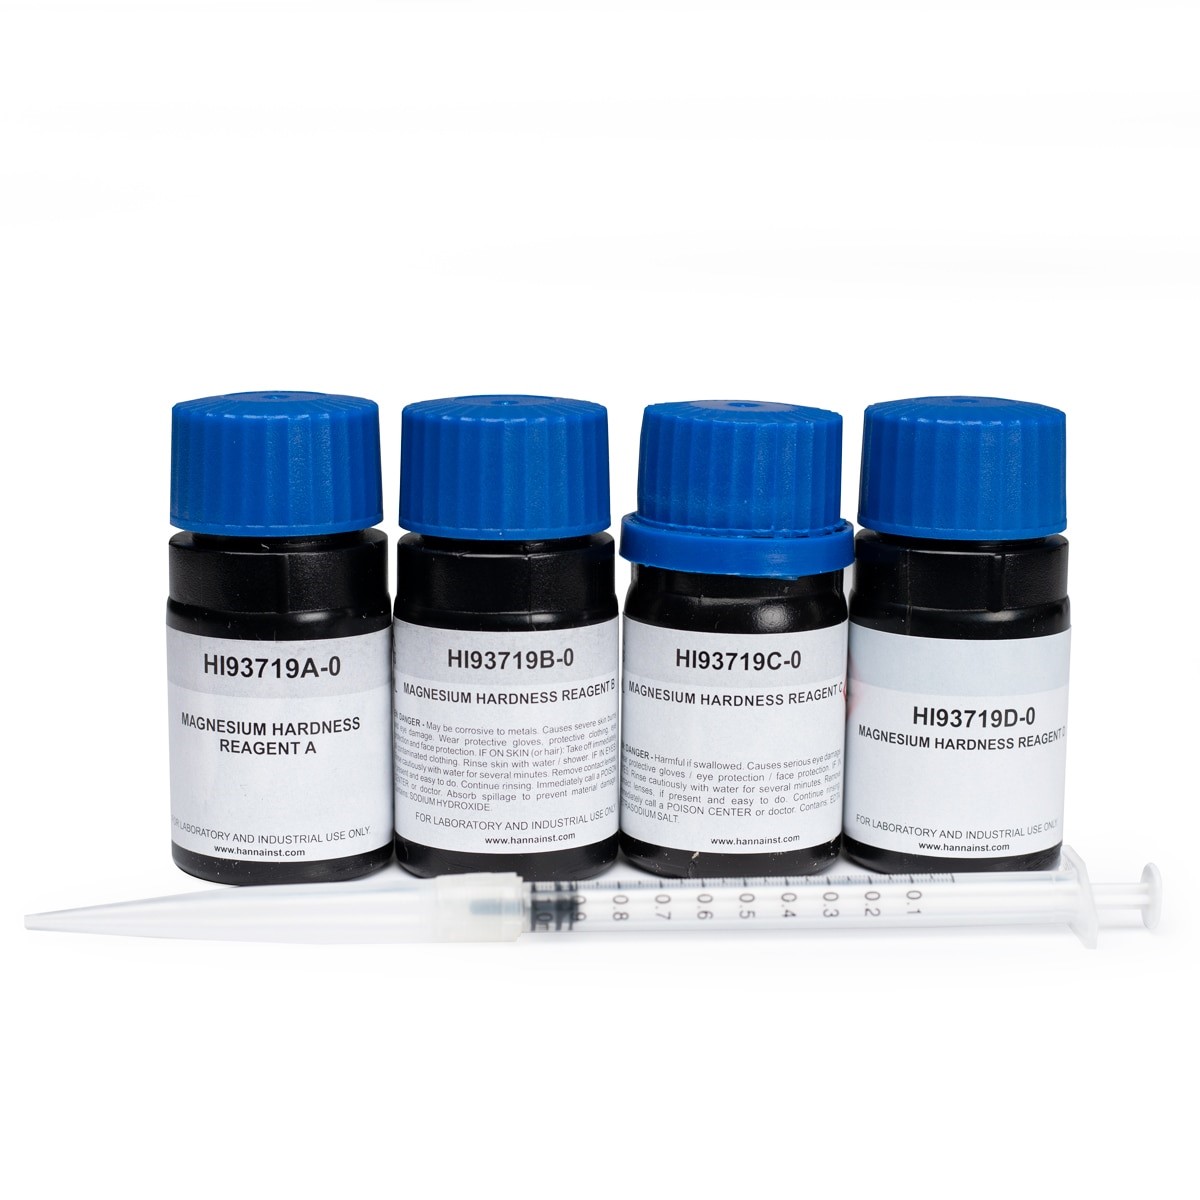 HI93719-01 Magnesium and Total Hardness Reagents (300 tests)